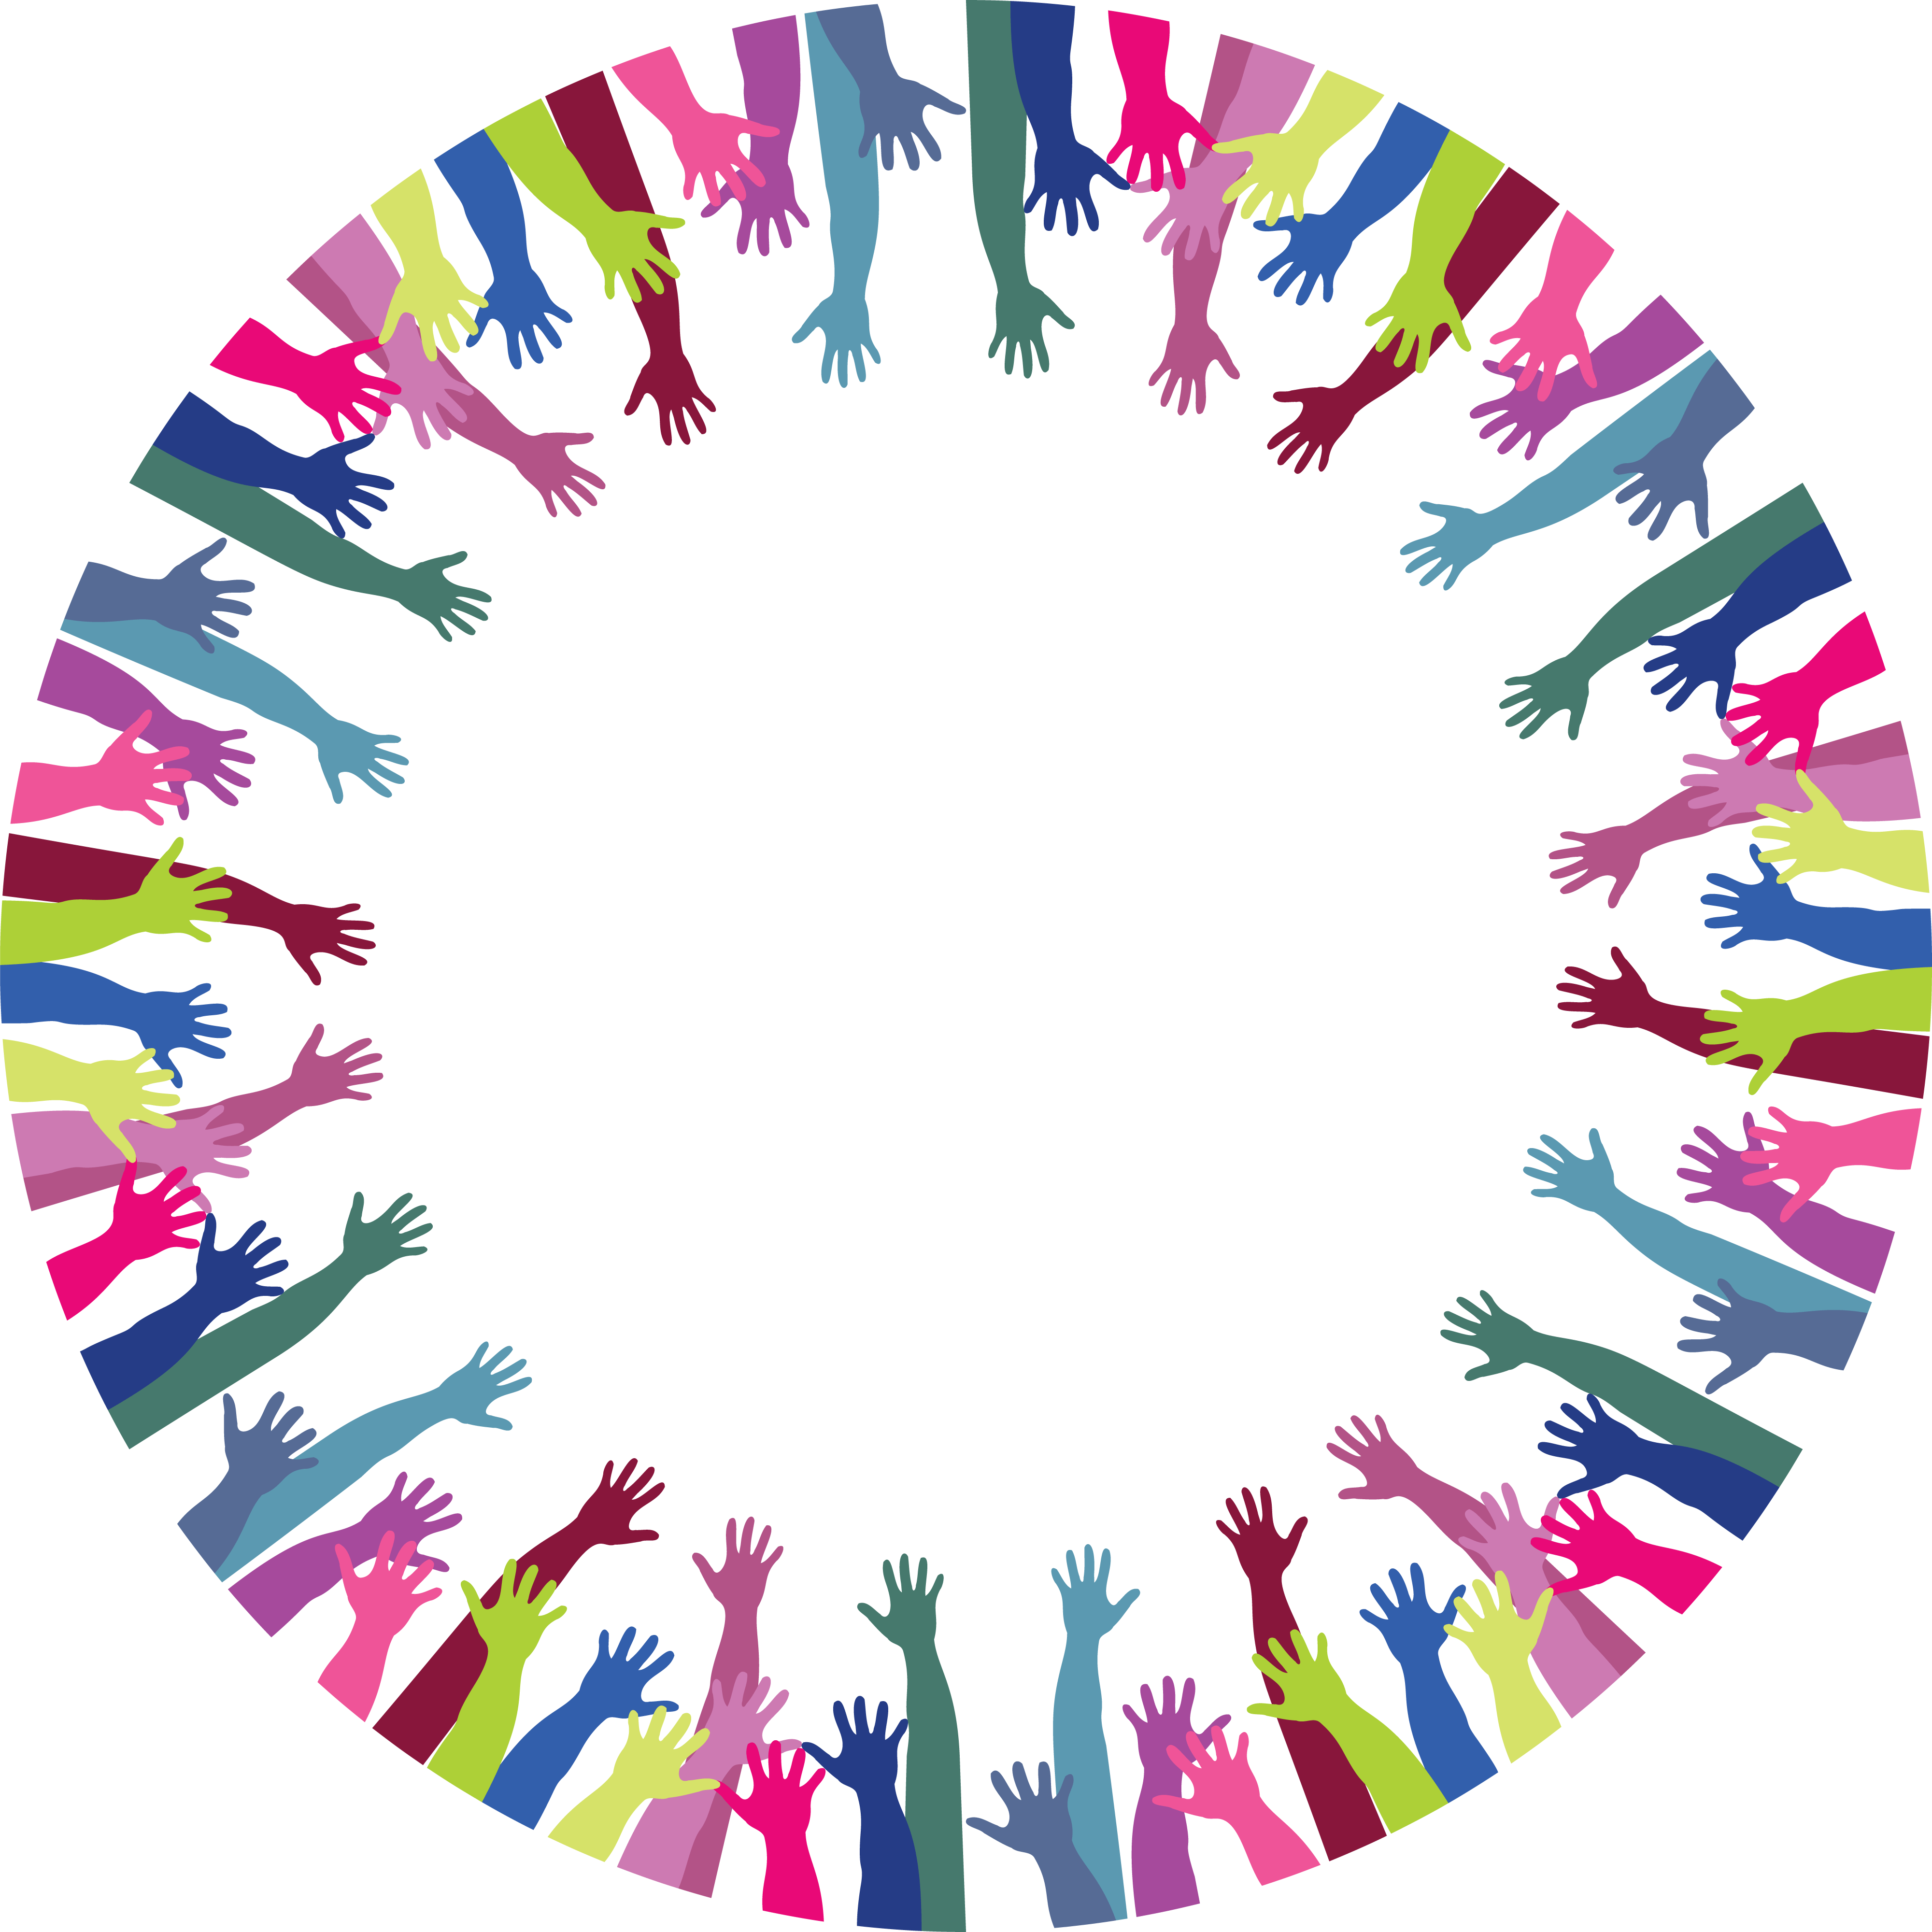 Circle of Hands Logo - PNG Circle Of Hands Transparent Circle Of Hands.PNG Images. | PlusPNG